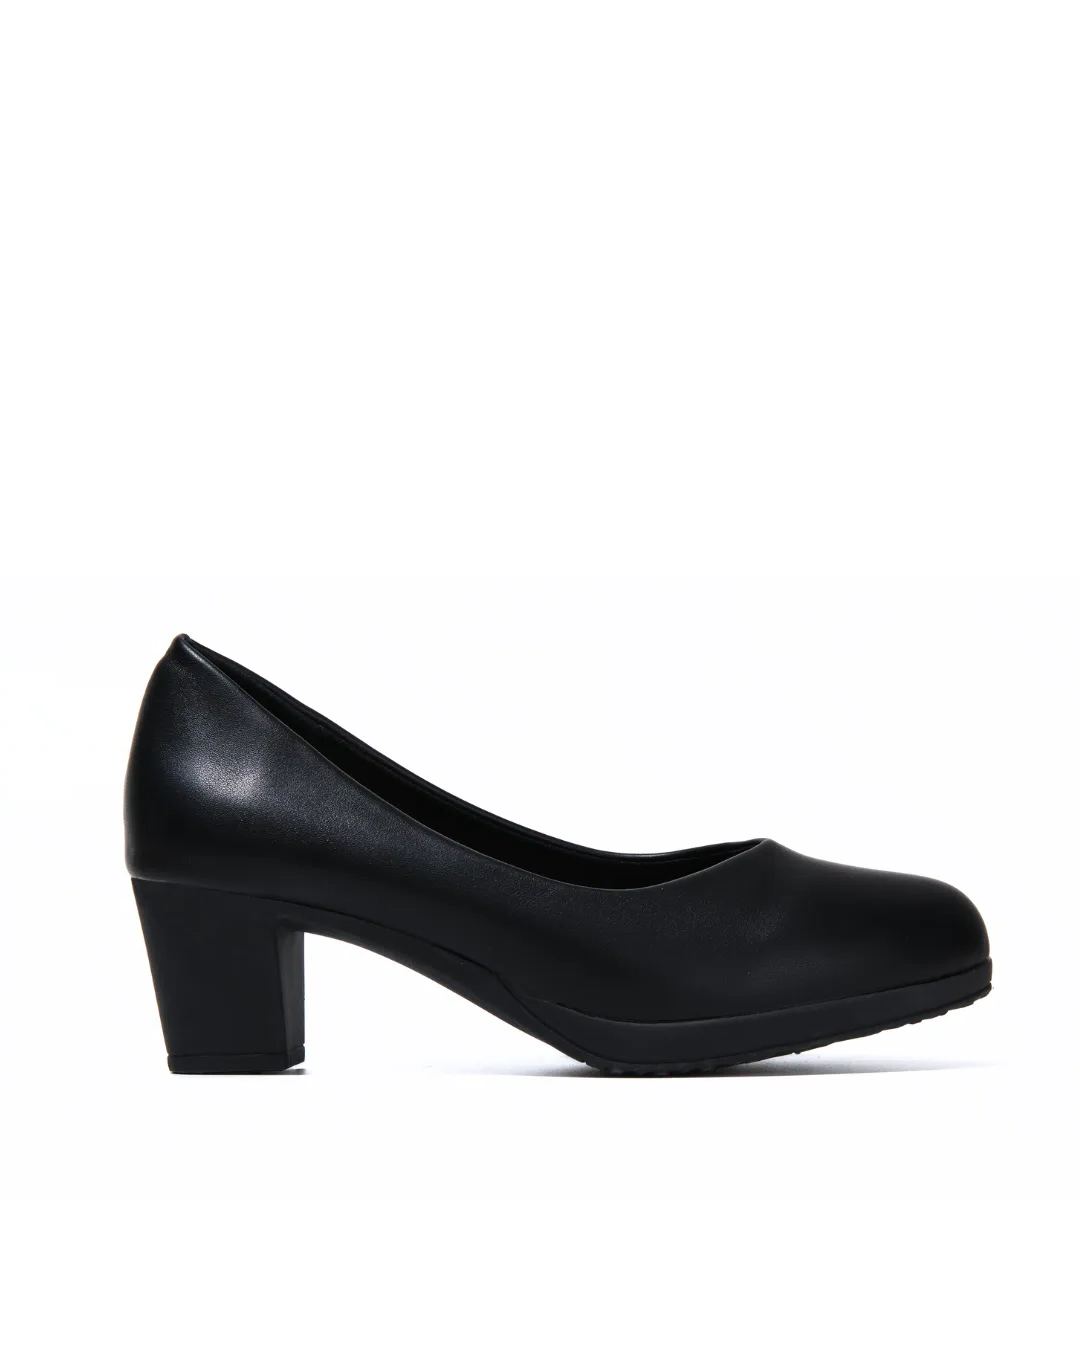 【NEW】Lyden Air-Cushioned Series 5.5cm High Heels - Classic Black